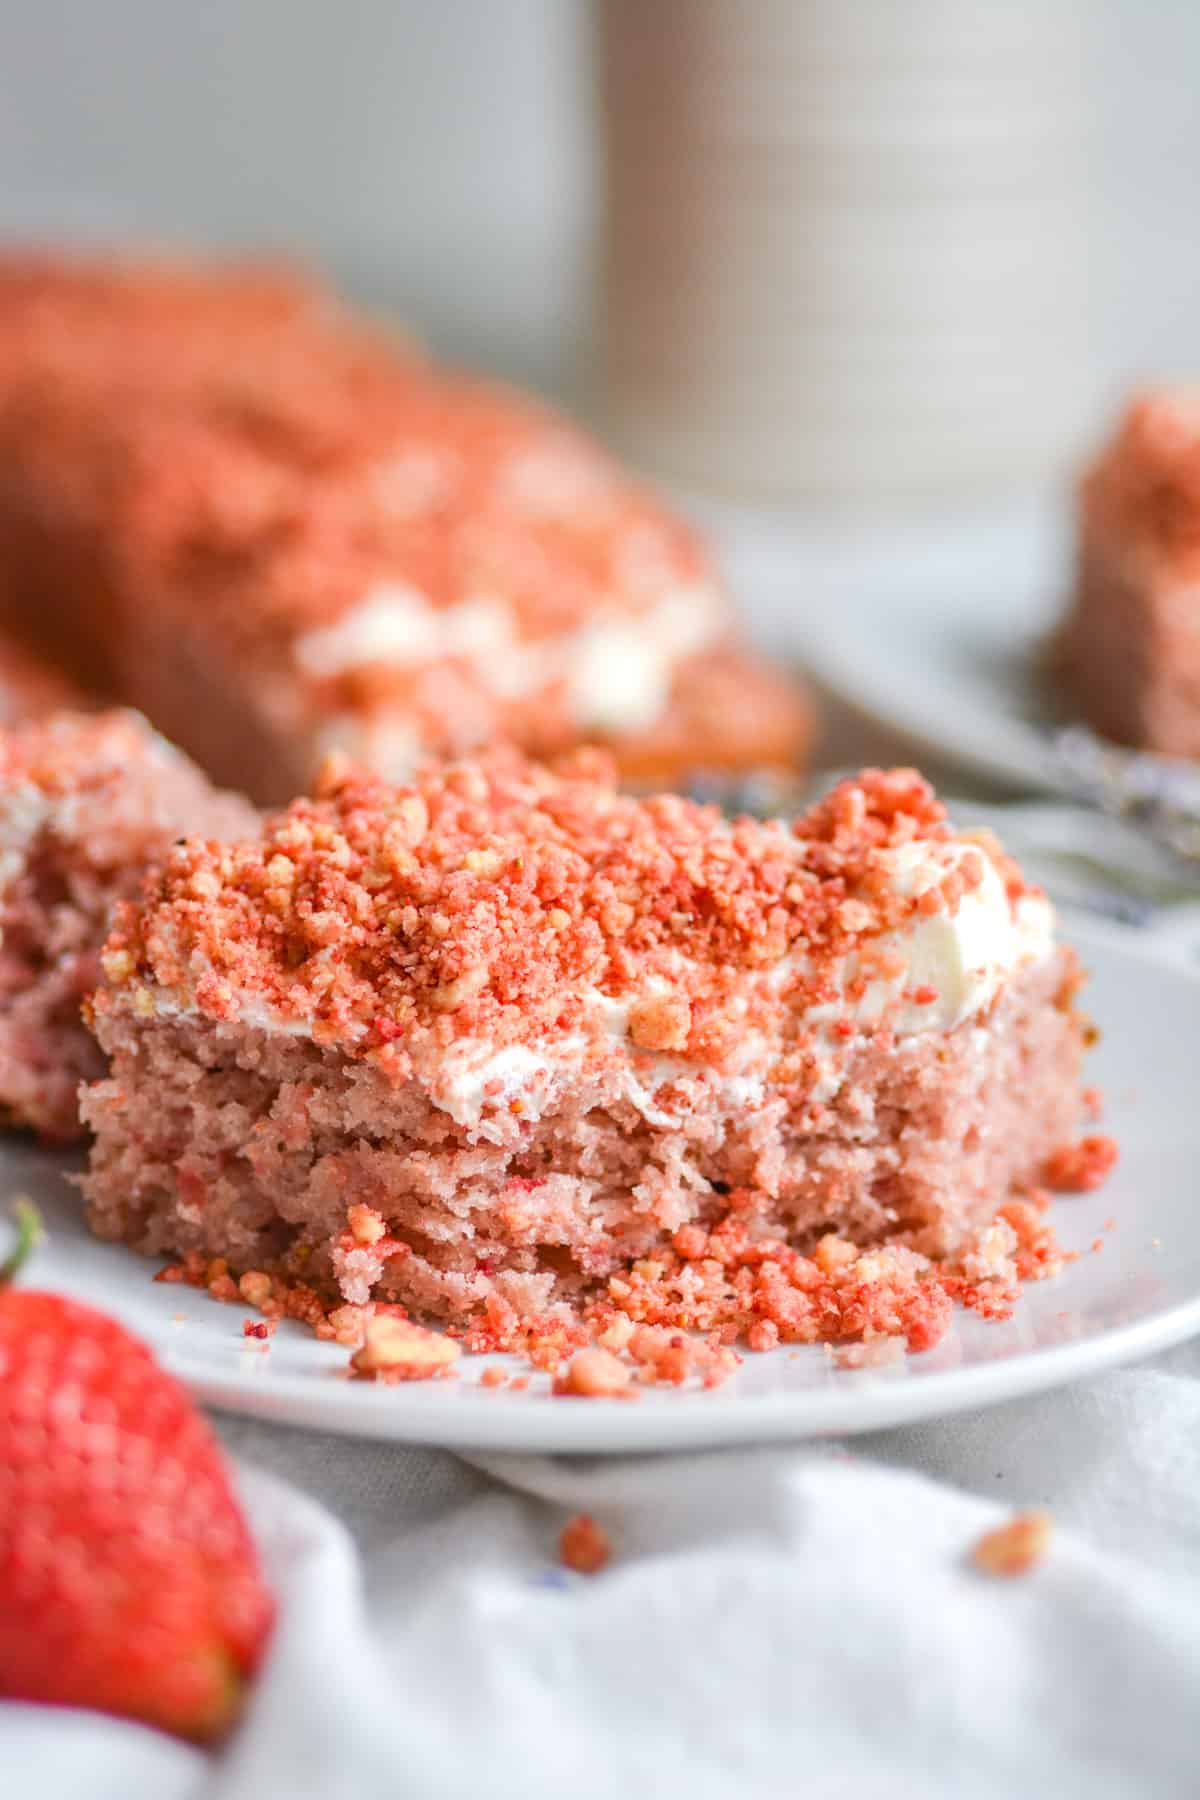 Easy Vegan Strawberry Crunch Cake with a bite taken out of it.